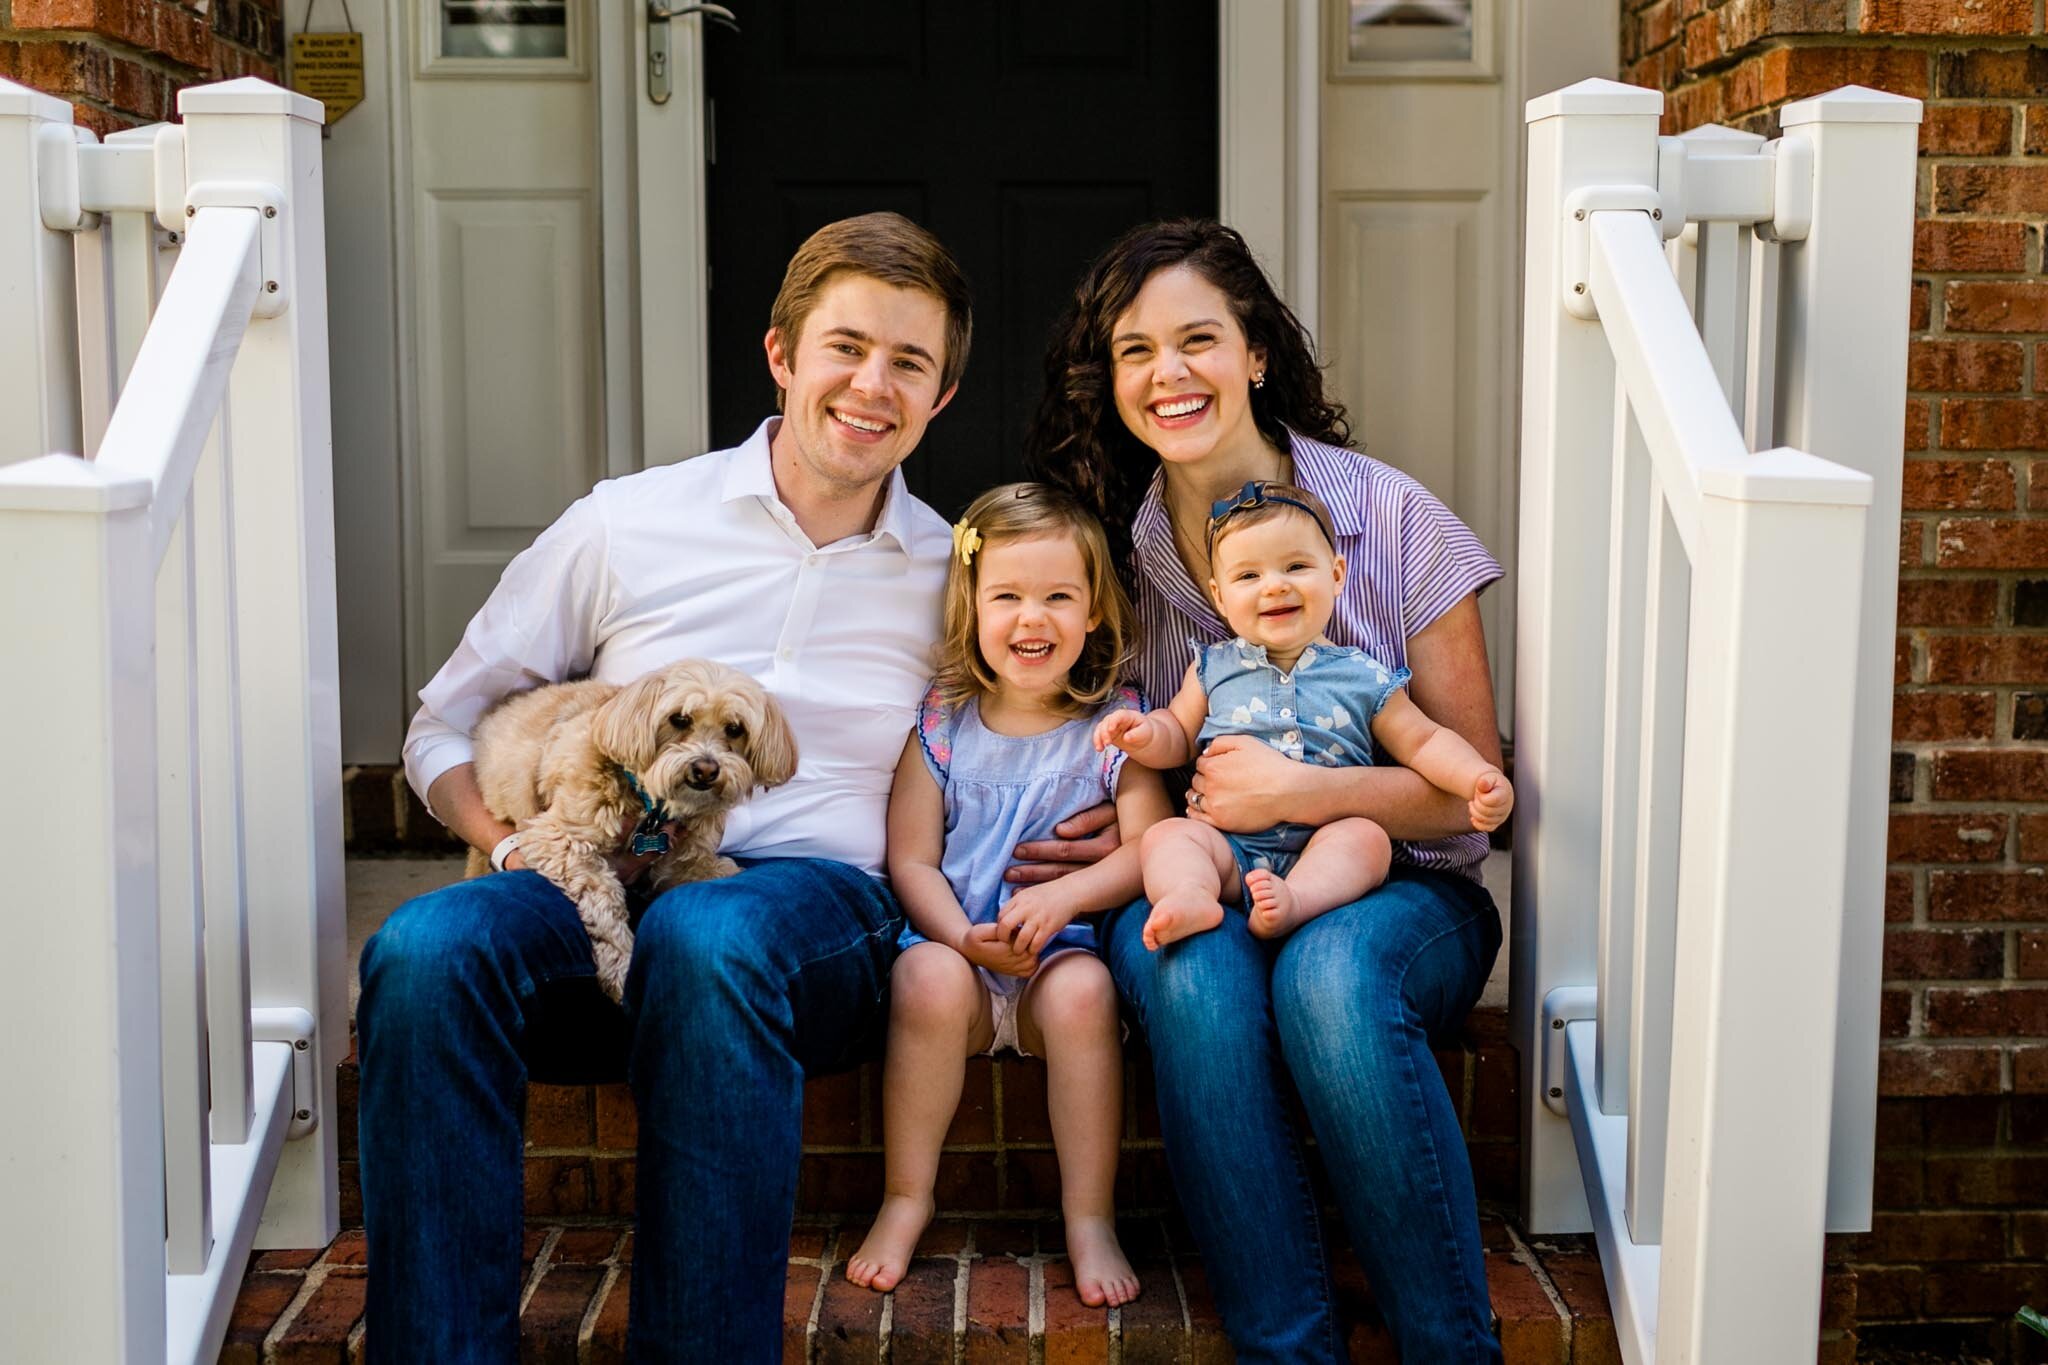 Raleigh Family Photographer | By G. Lin Photography | Candid outdoor family portrait sitting on porch